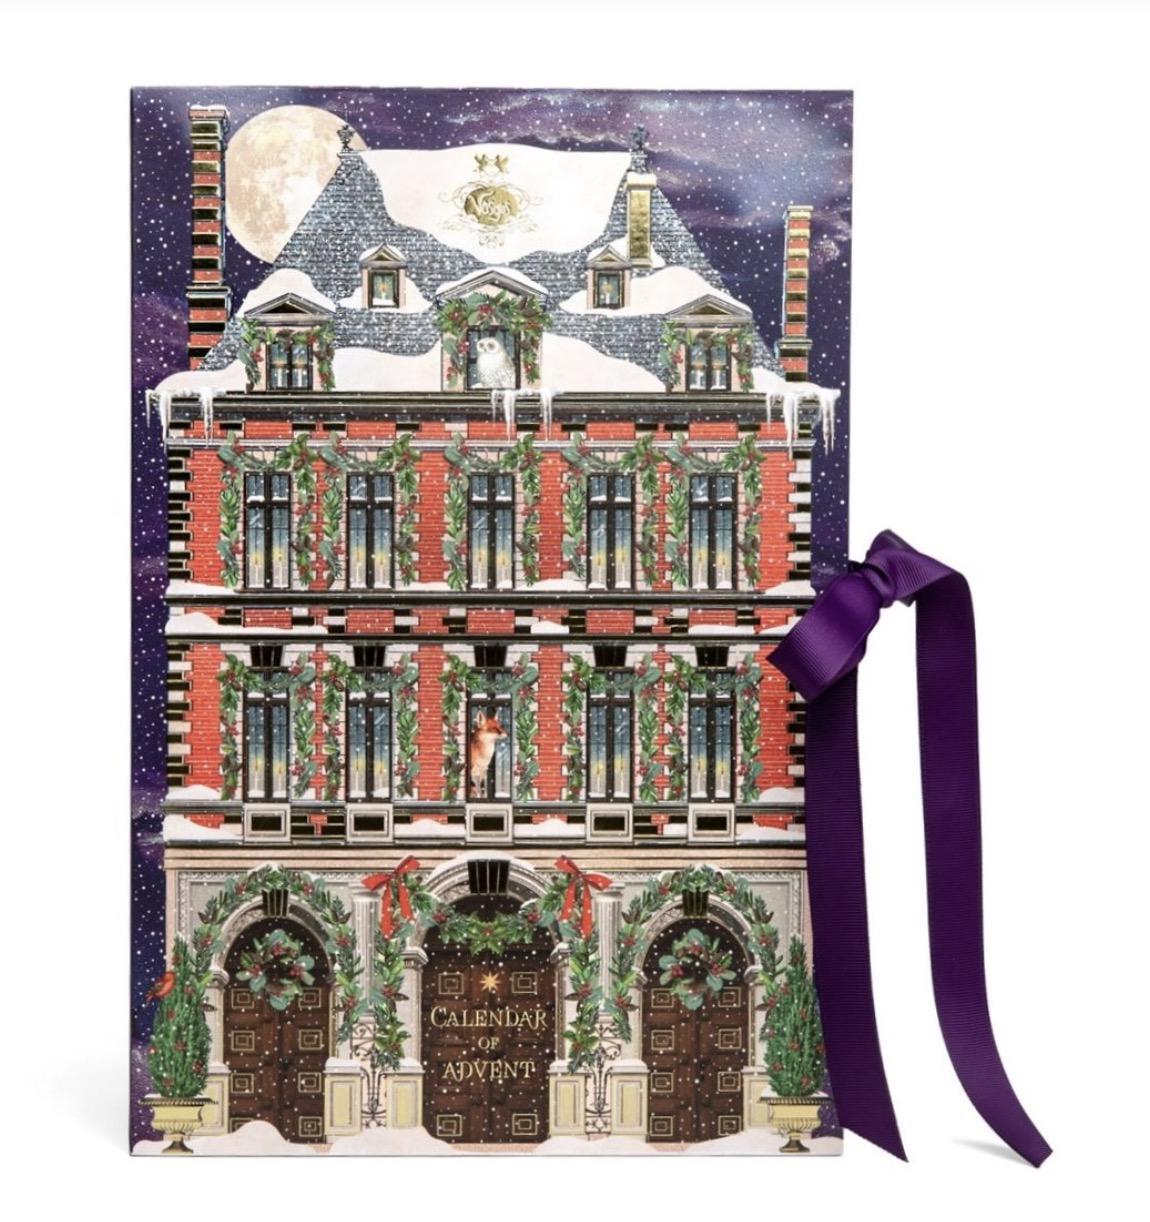 Read more about the article Vosges Haut – A Chocolate Calendar of Advent – On Sale Now!